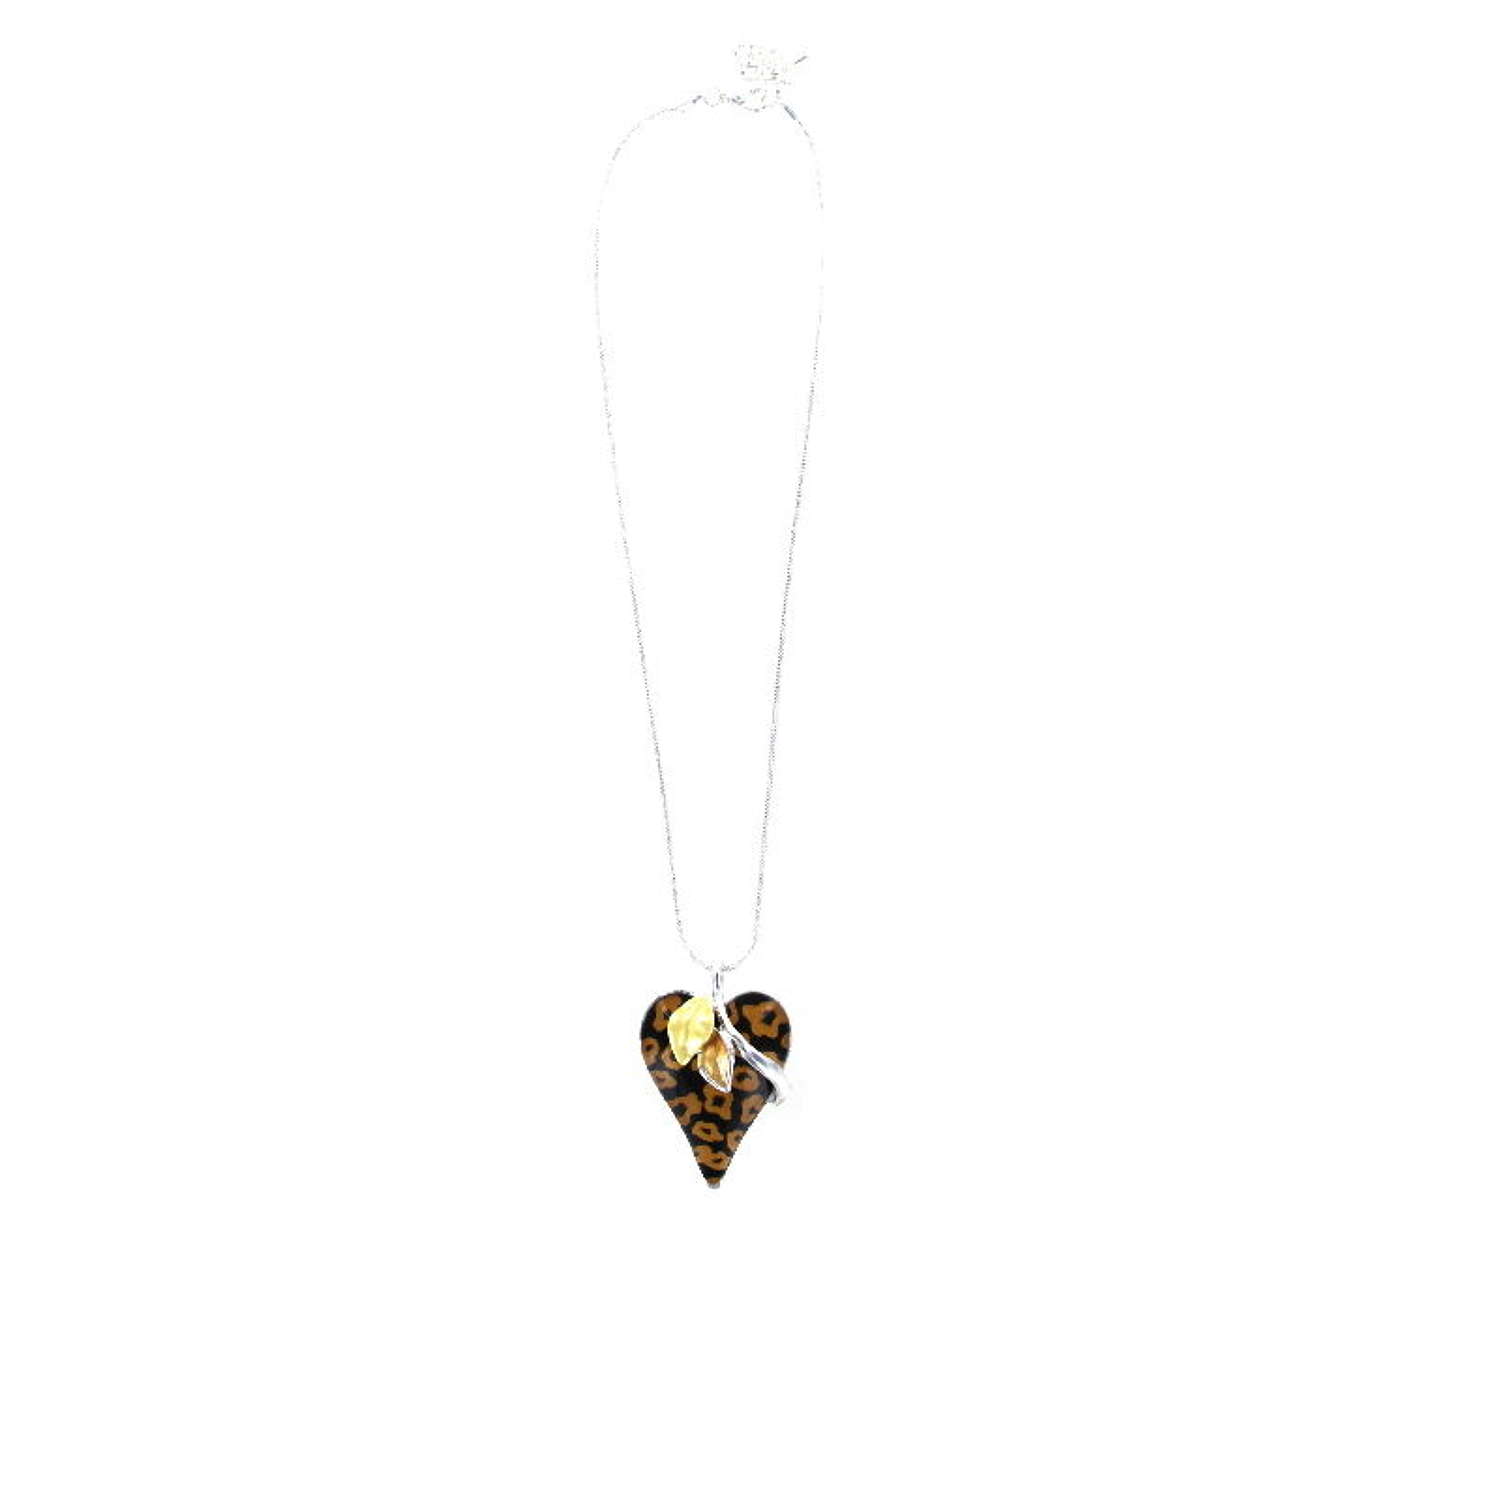 Animal print heart pendant necklace with enamel accents.